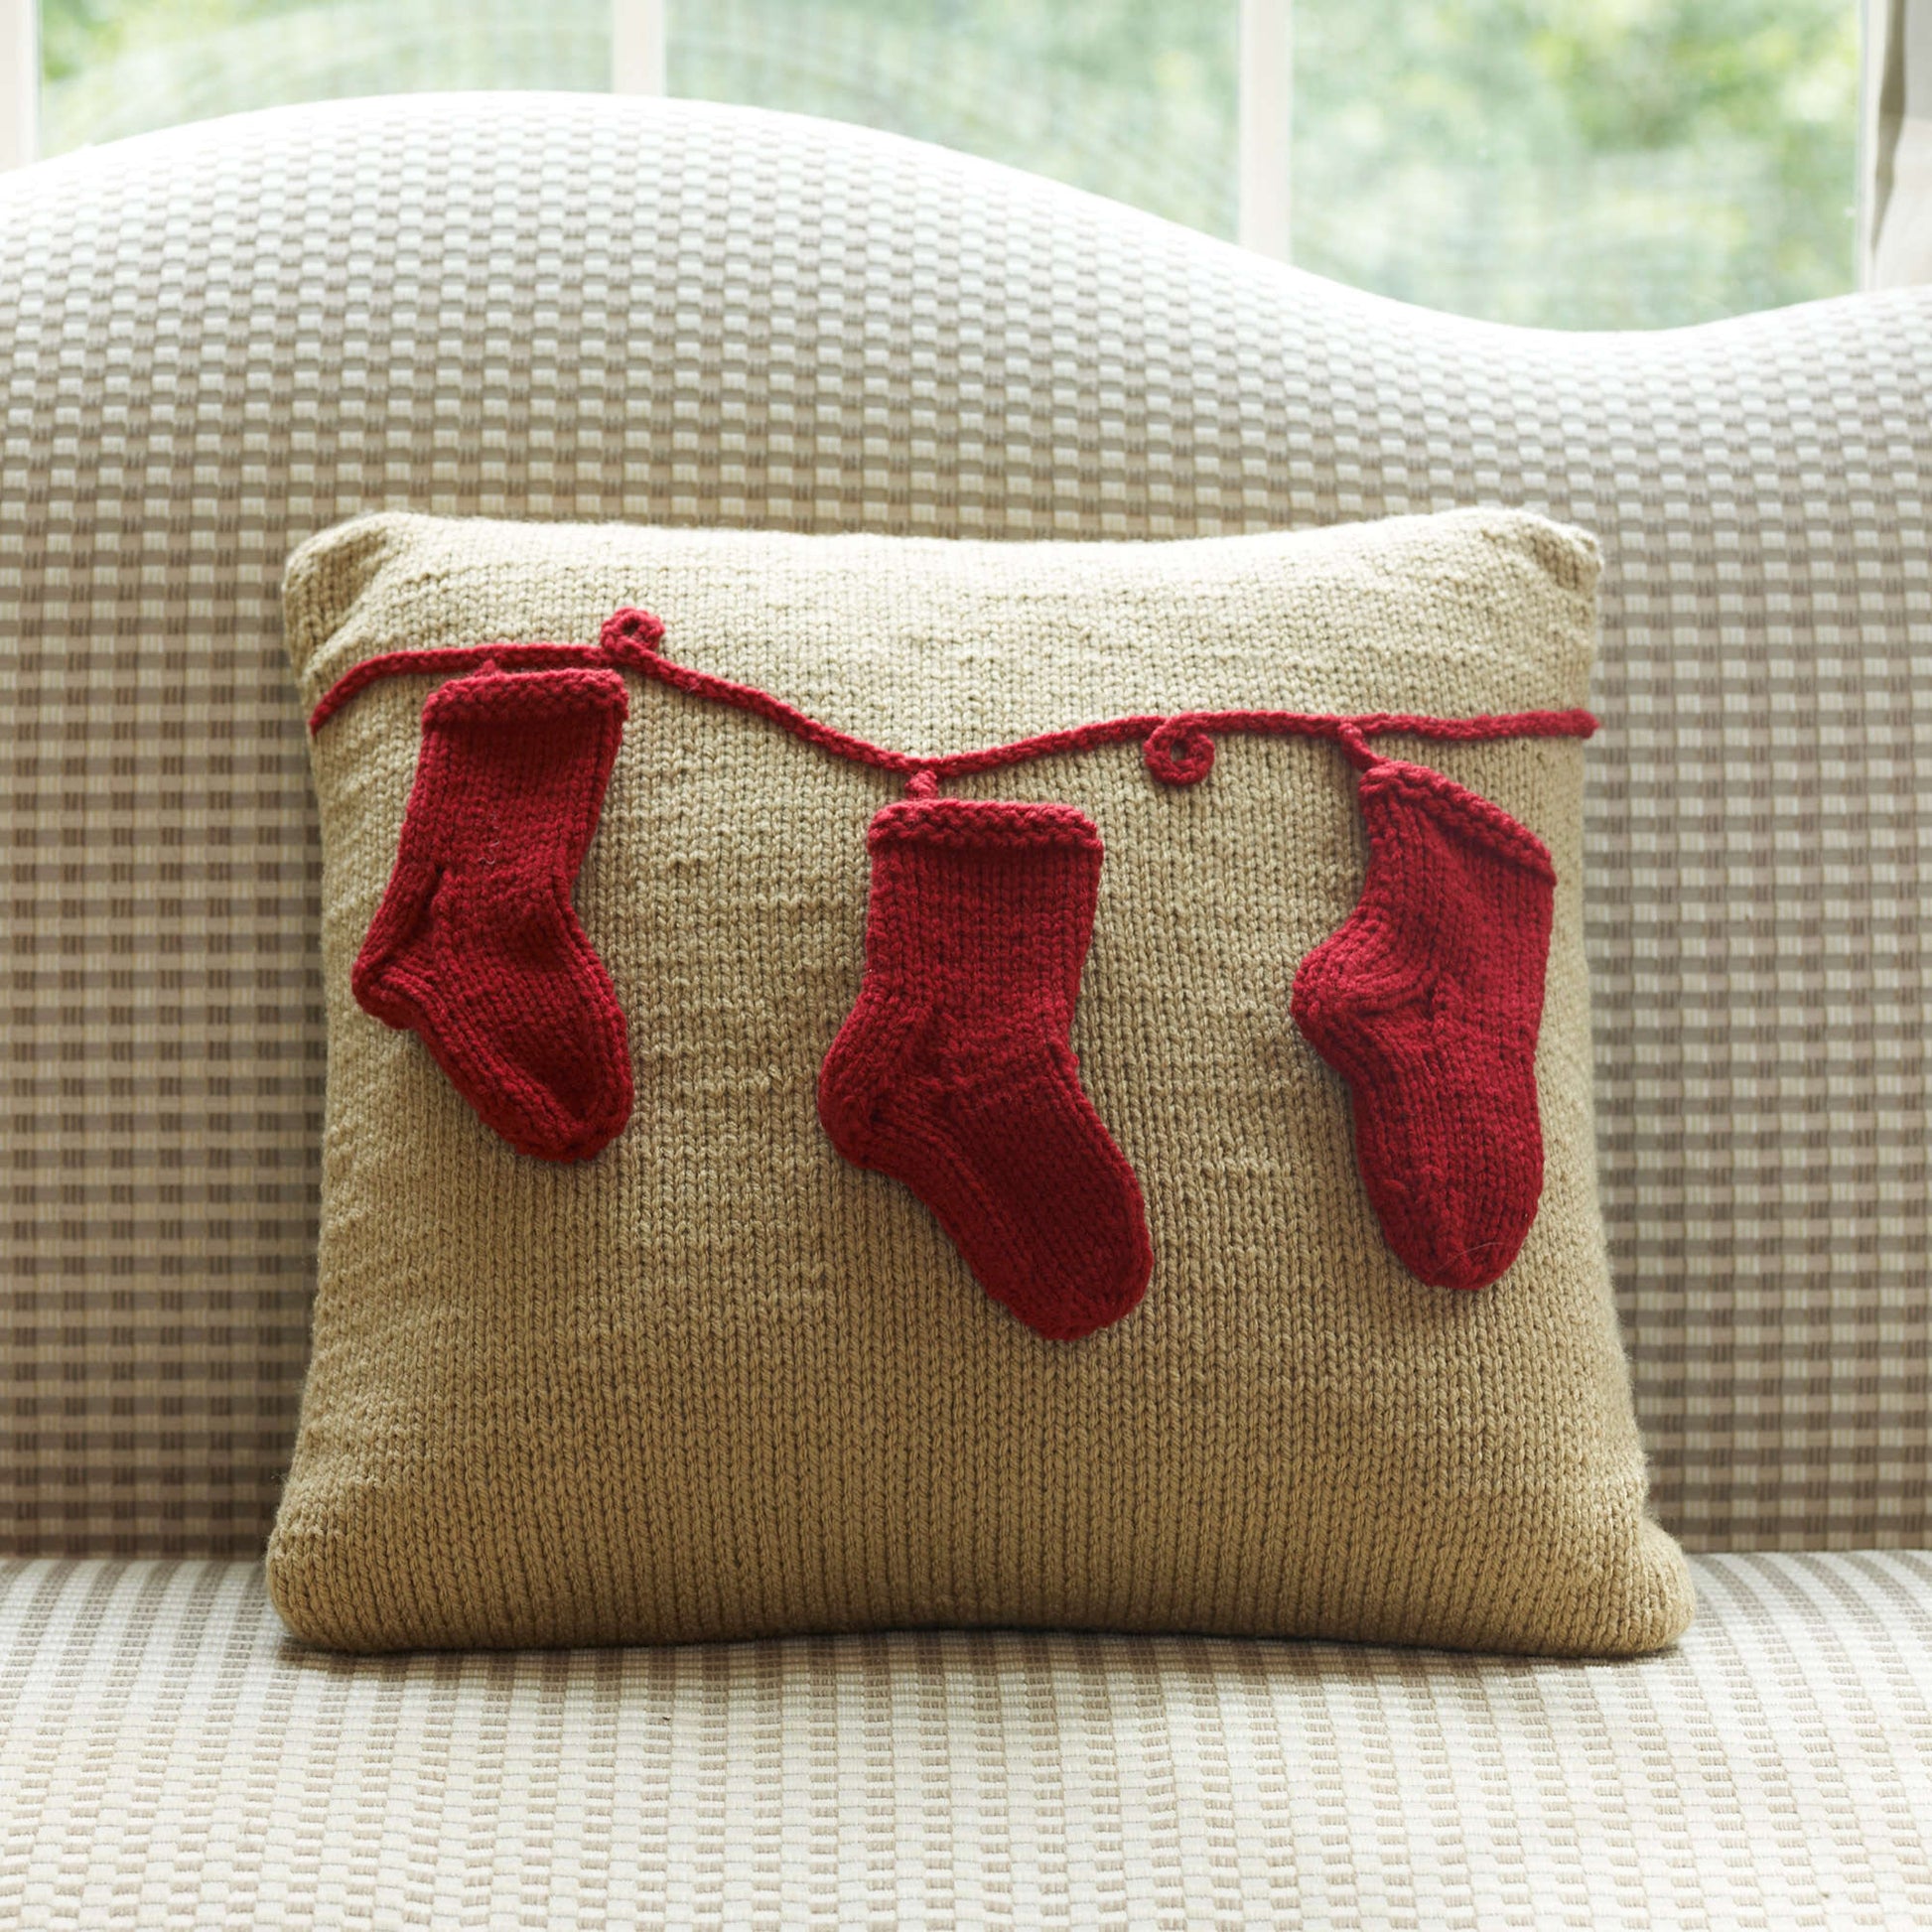 Free Red Heart Holiday Pillow With Stockings Knit Pattern